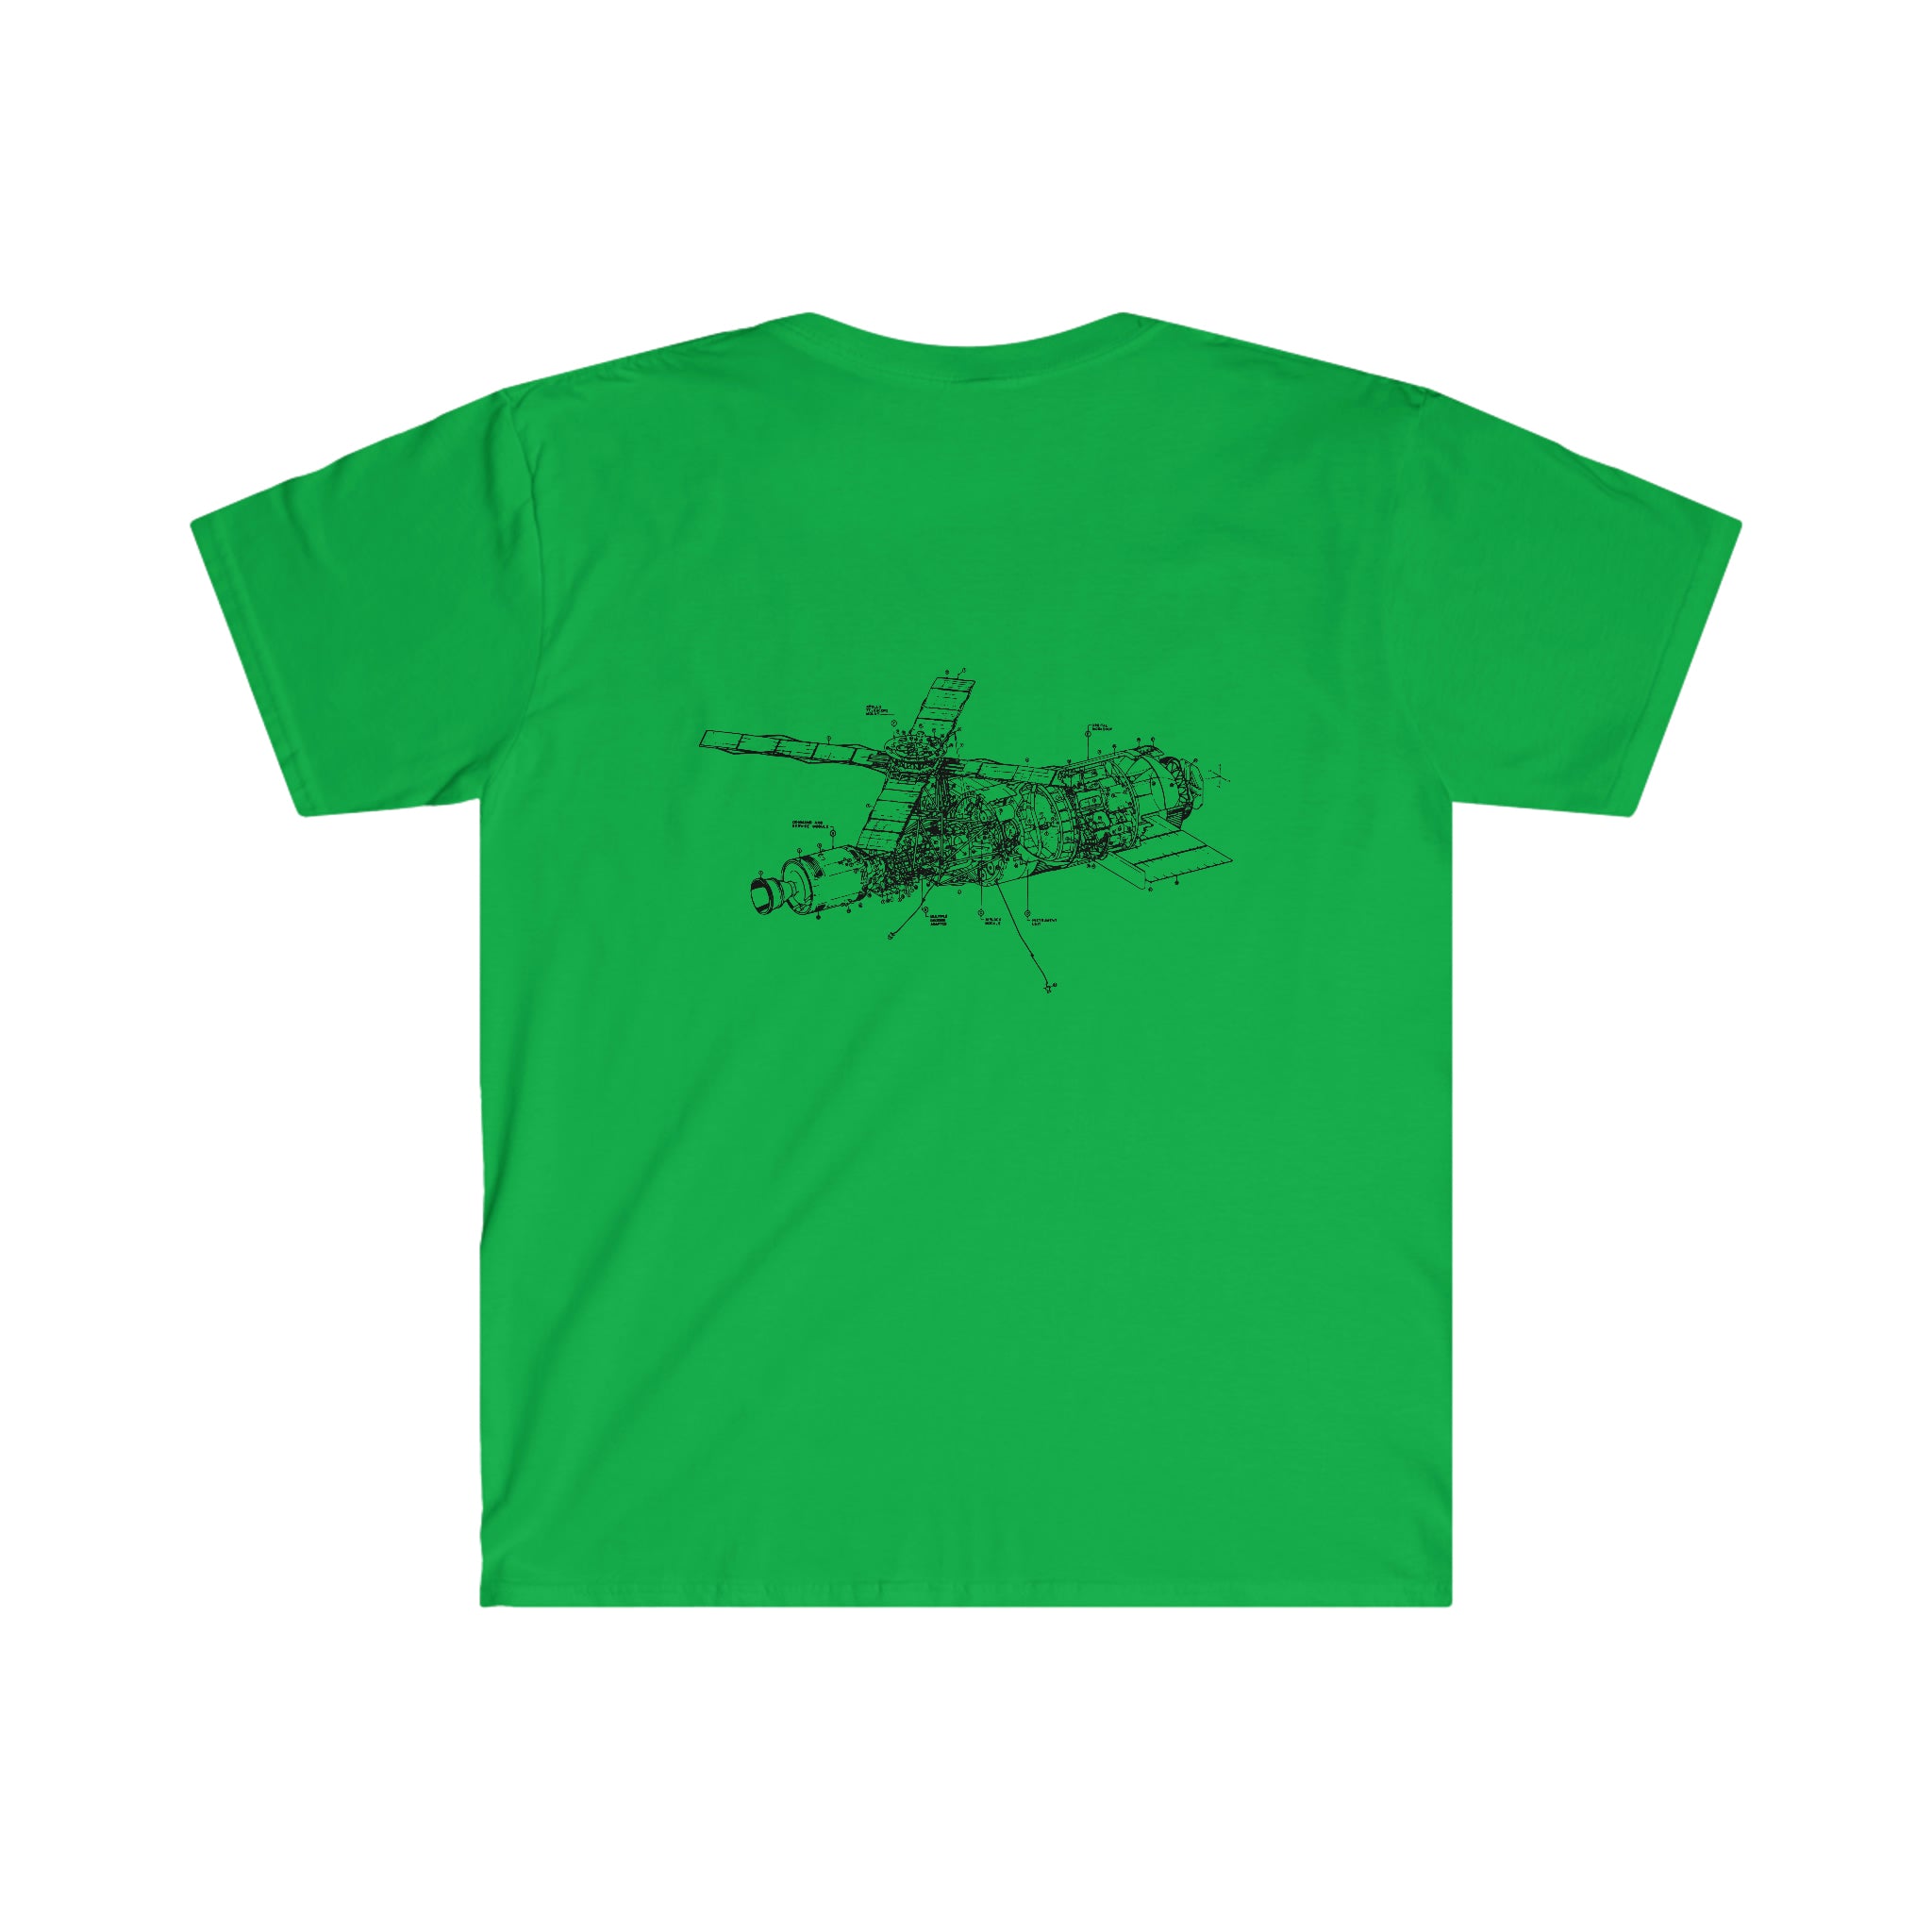 A Deep Deep Space t-shirt with a drawing of a helicopter from One Tee Project.